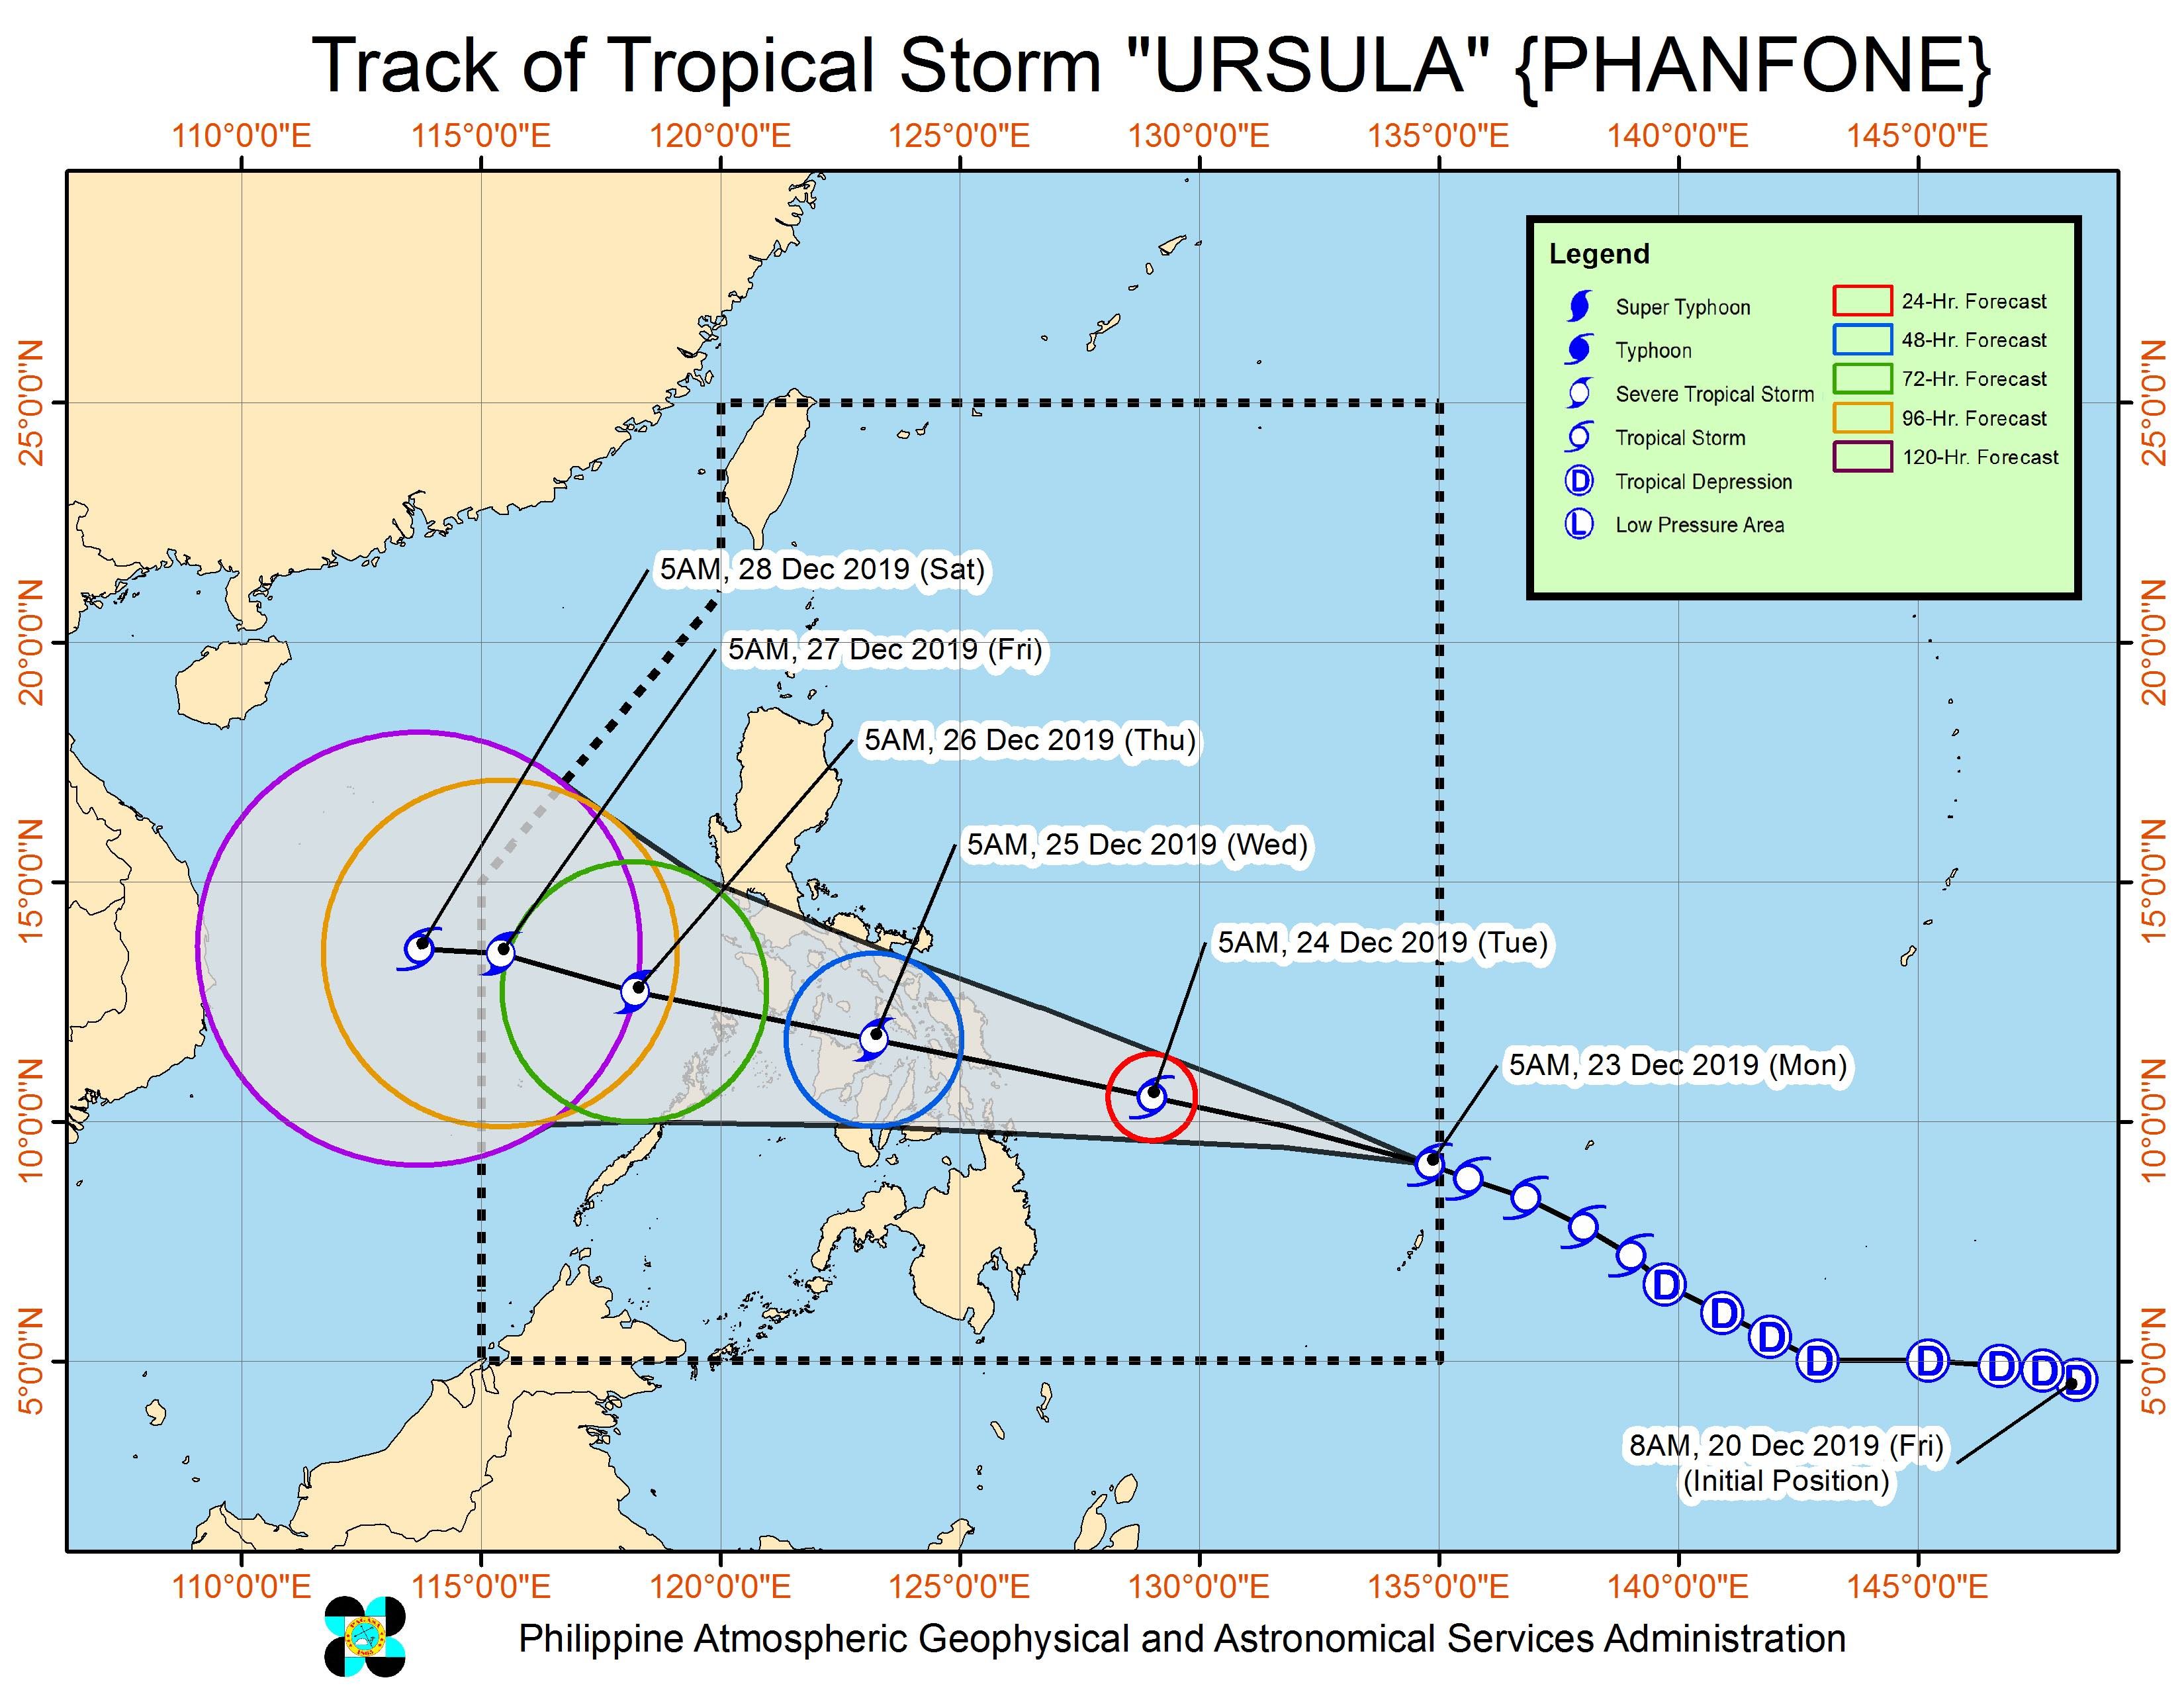 Forecast track of Tropical Storm Ursula (Phanfone) as of December 23, 2019, 8 am. Image from PAGASA 